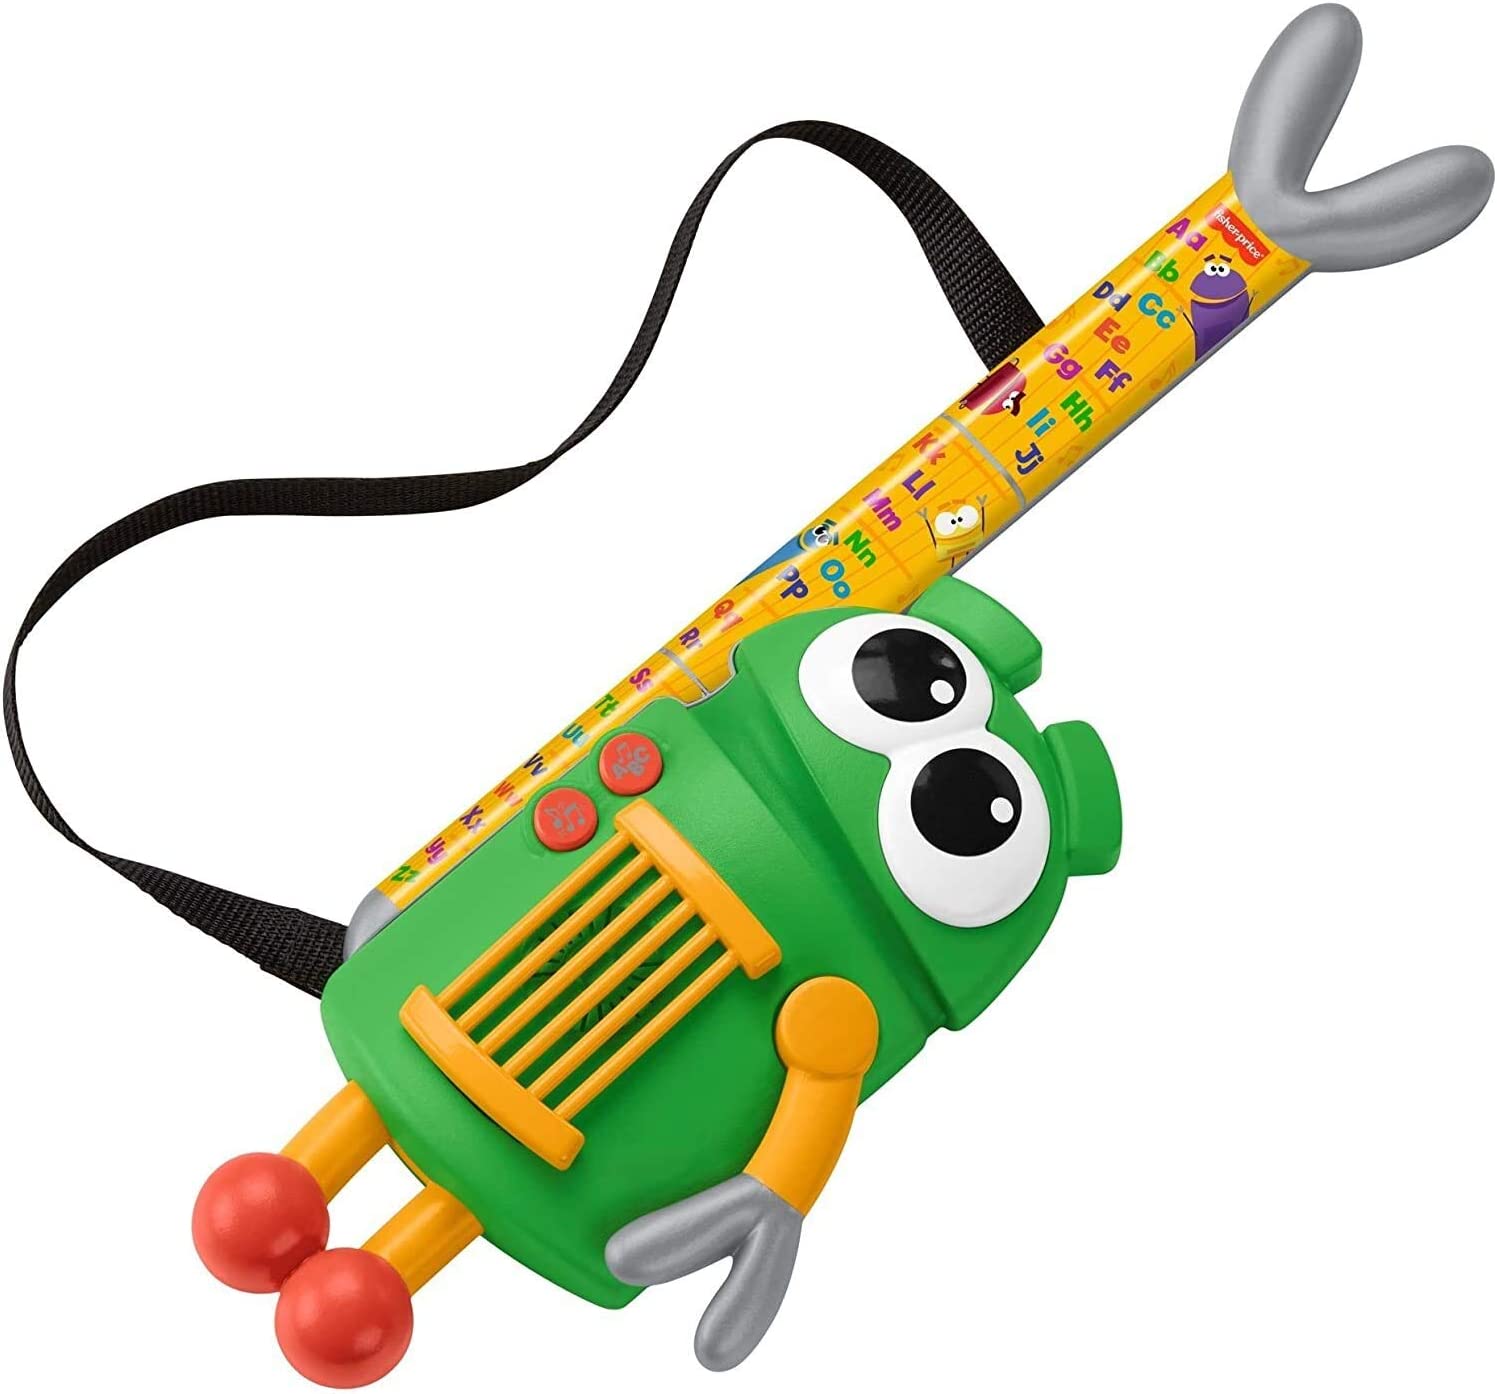 Fisher-Price StoryBots A to Z Rock Star Guitar